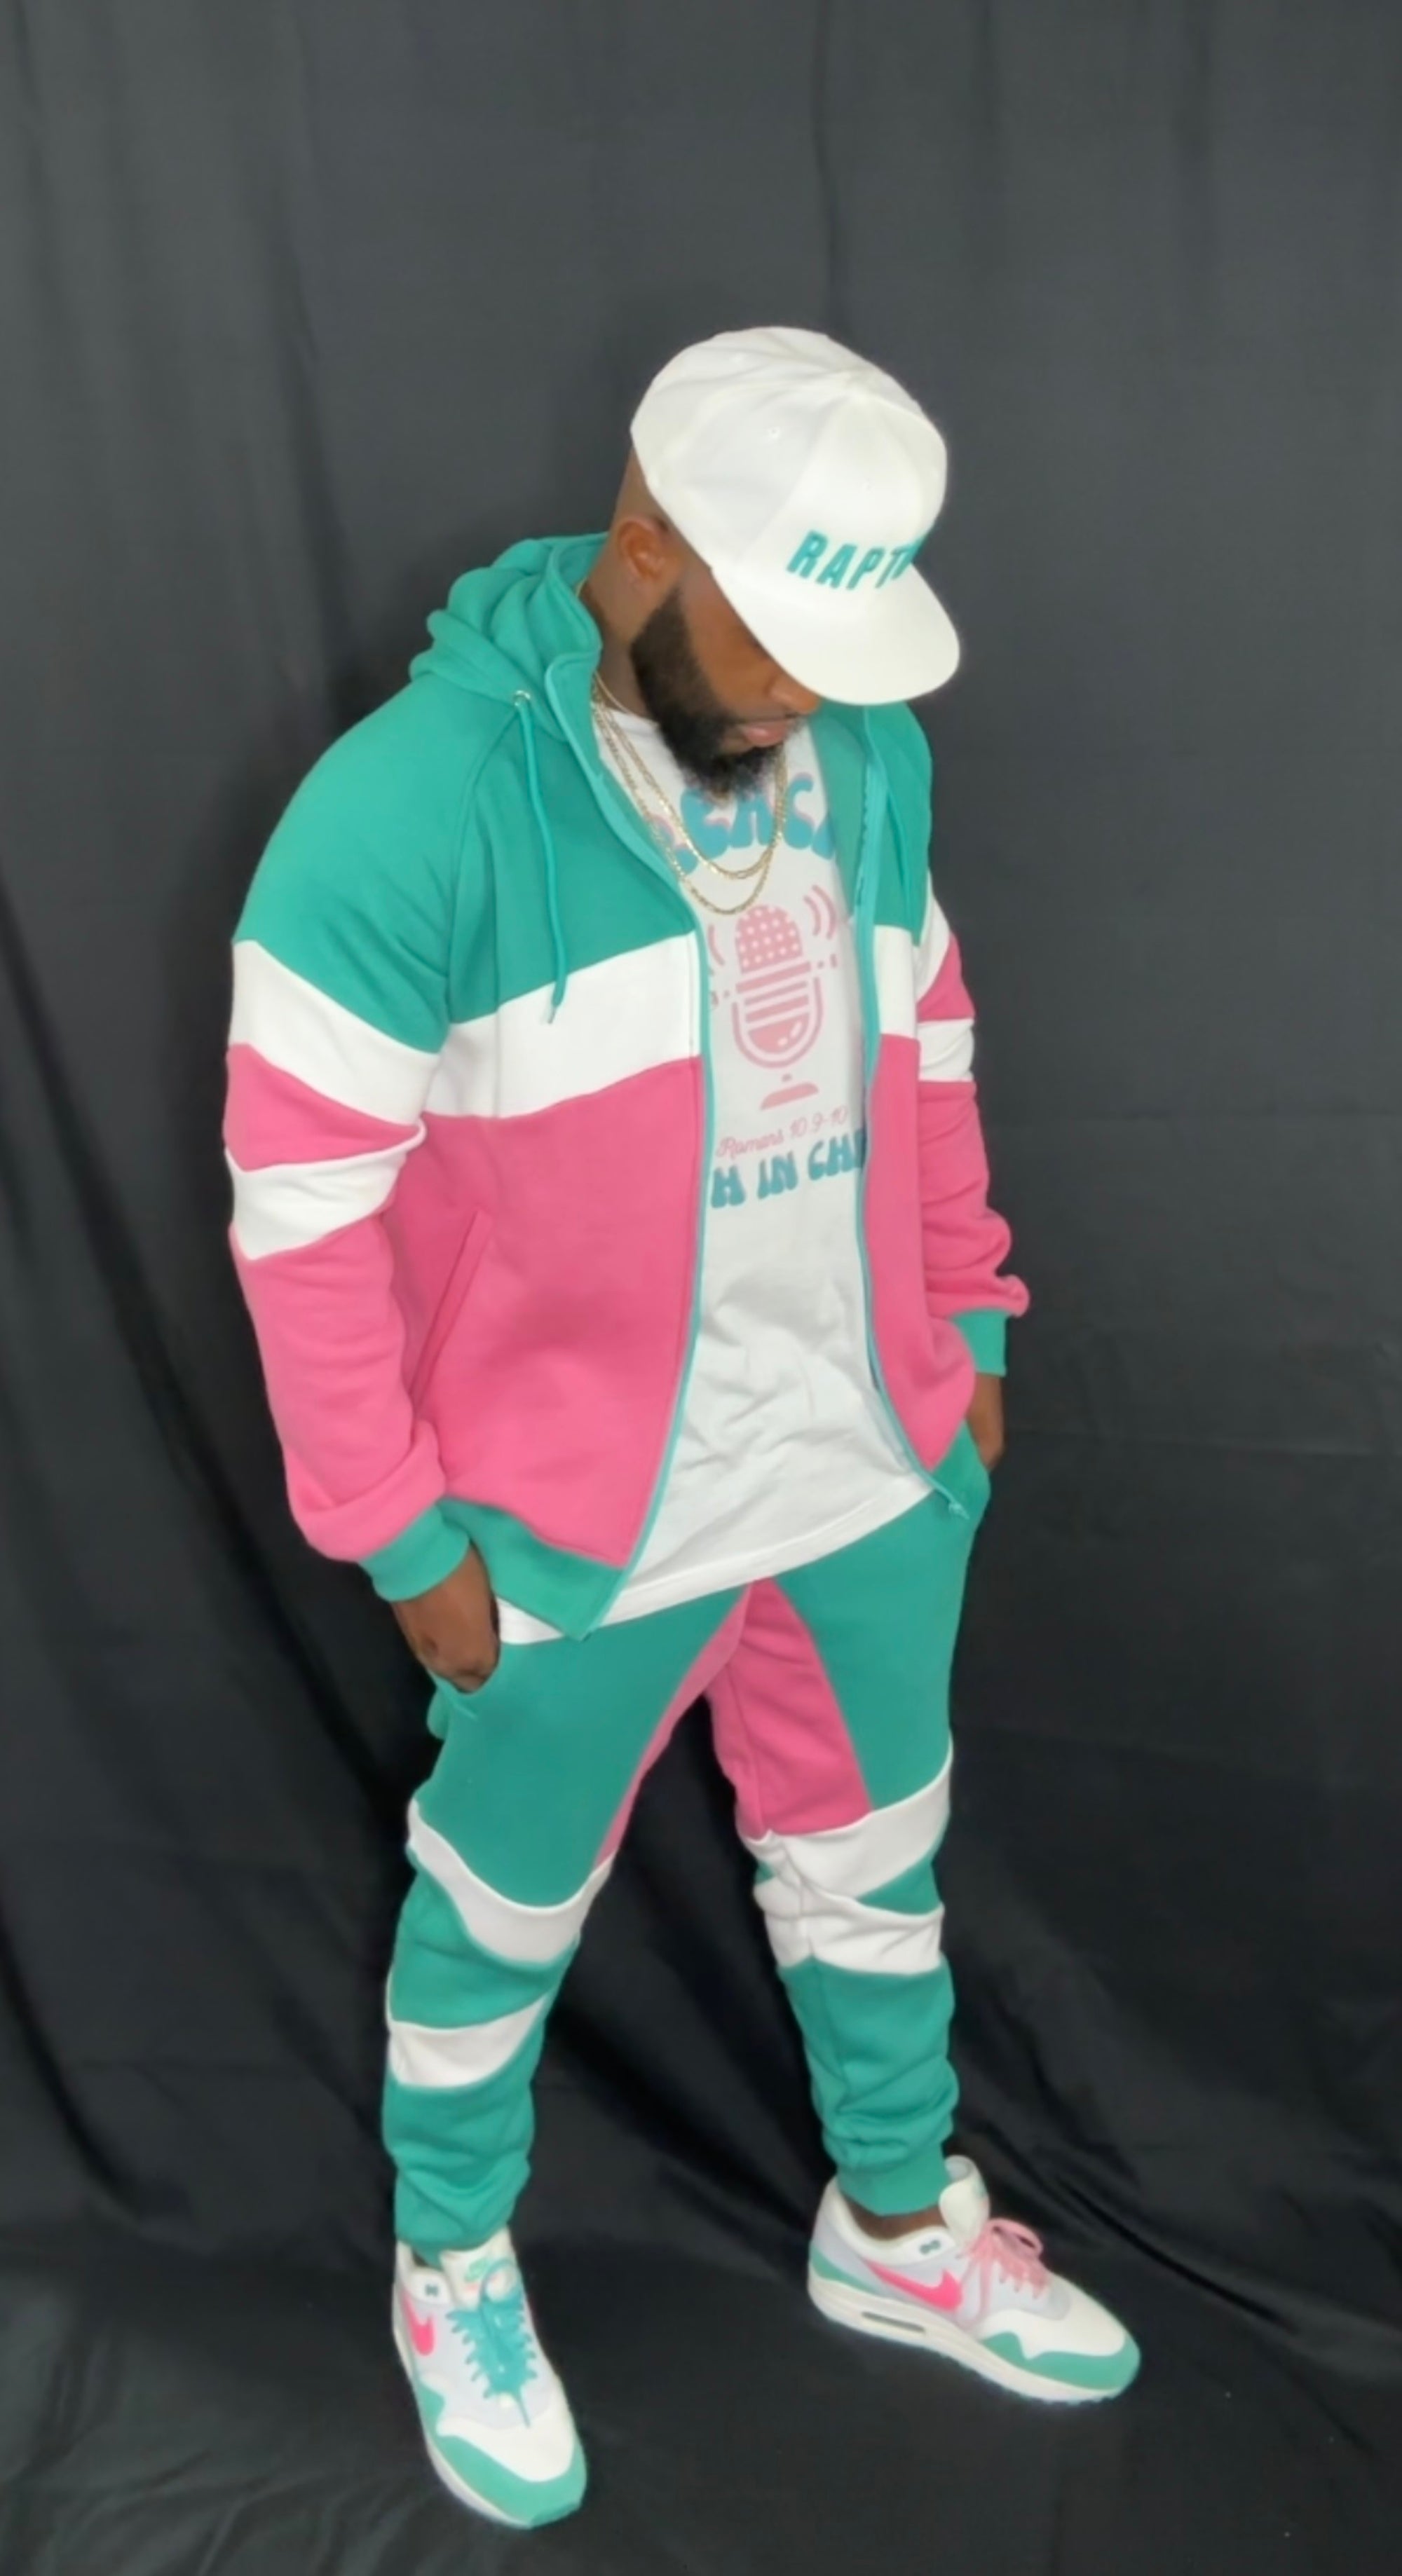 Preach Tracksuit Teal/White/Pink 100% Cotton Fleece